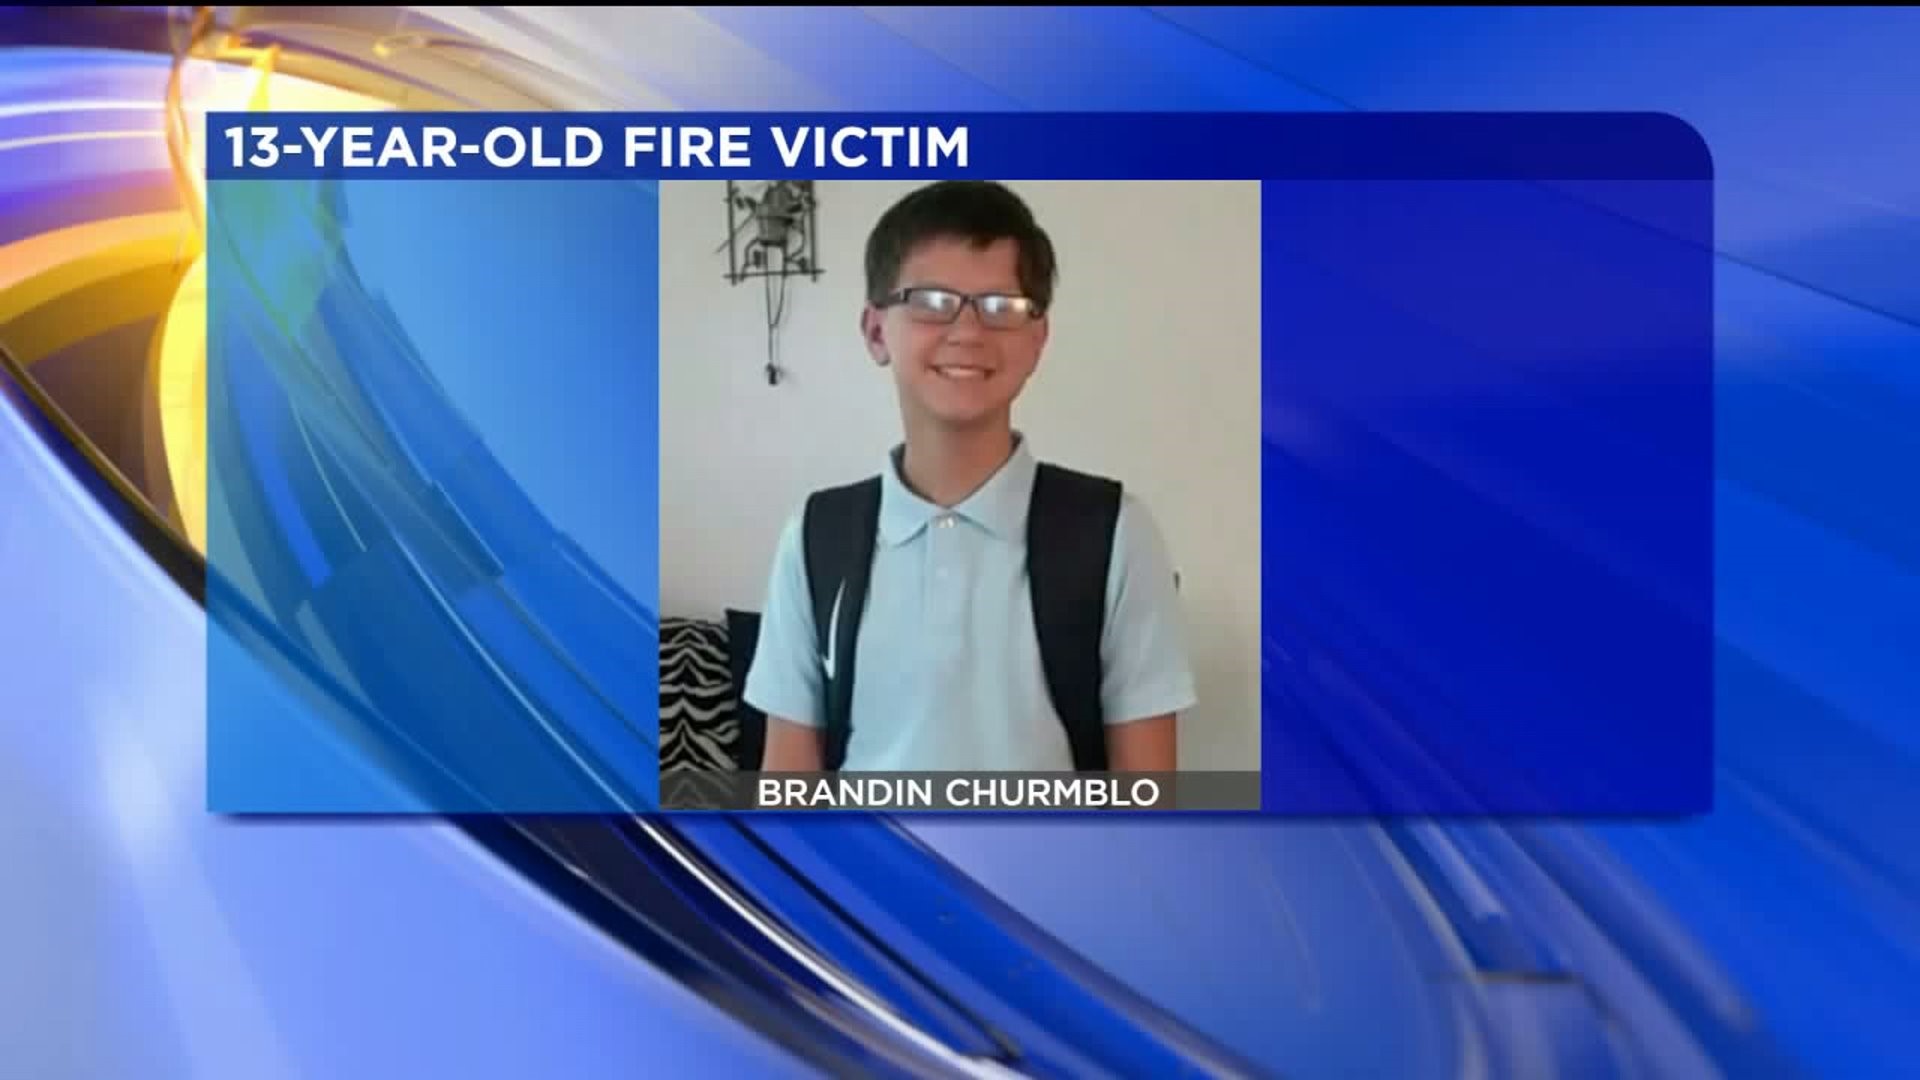 Community Support for Family of Scranton Fire Victim